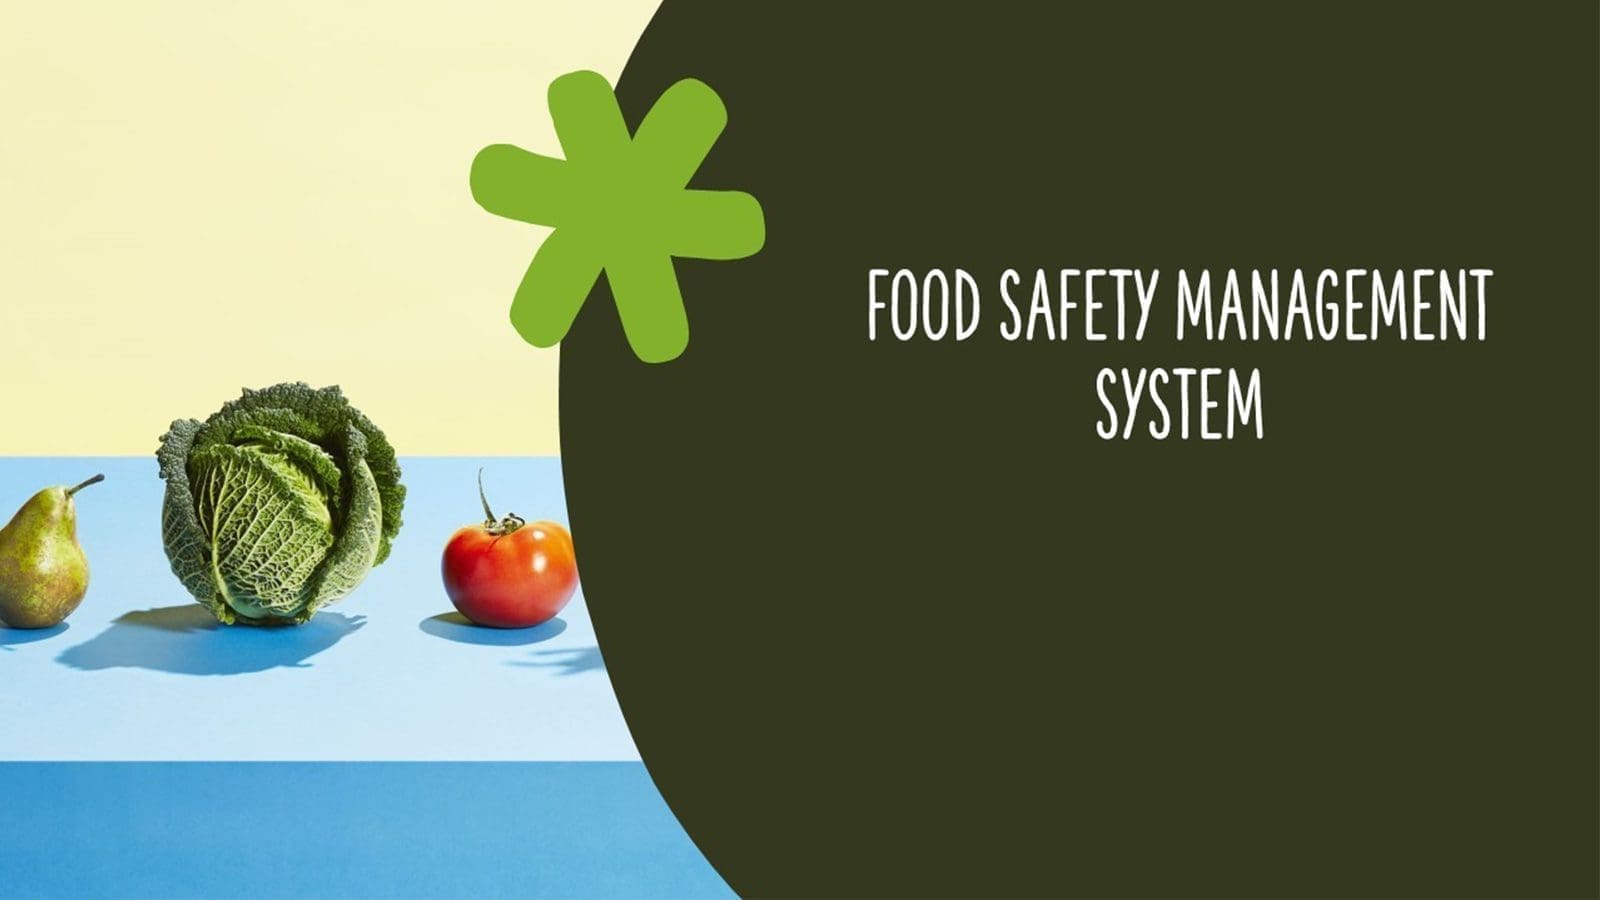 Global review reveals progress, challenges in Food Safety Management Systems